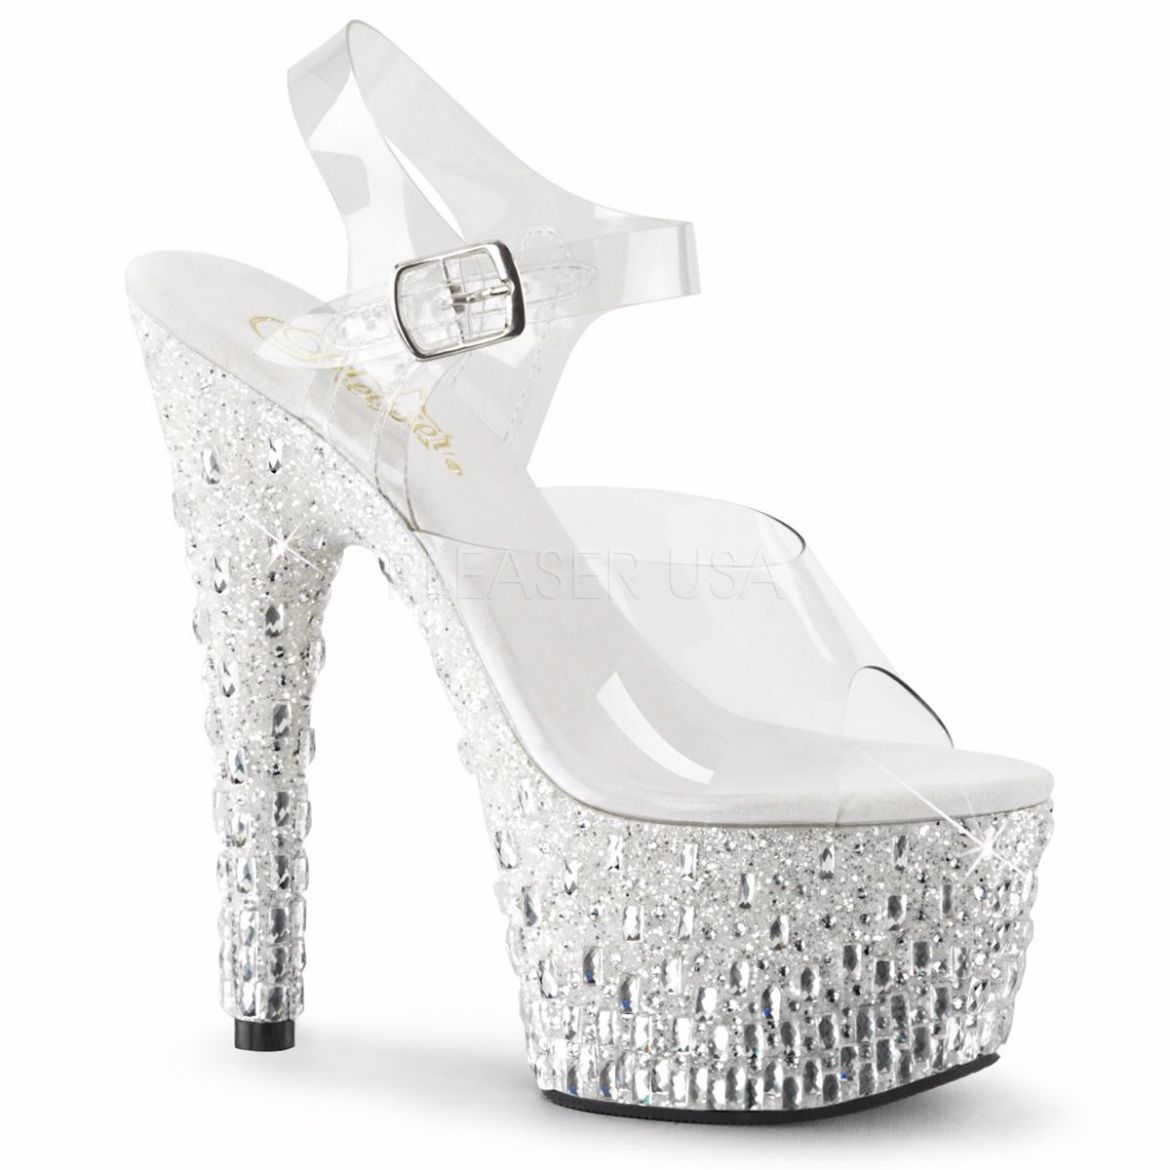 Product image of Pleaser Adore-708Mr-5 Clear/White-Silver, 7 inch (17.8 cm) Heel, 2 3/4 inch (7 cm) Platform Sandal Shoes